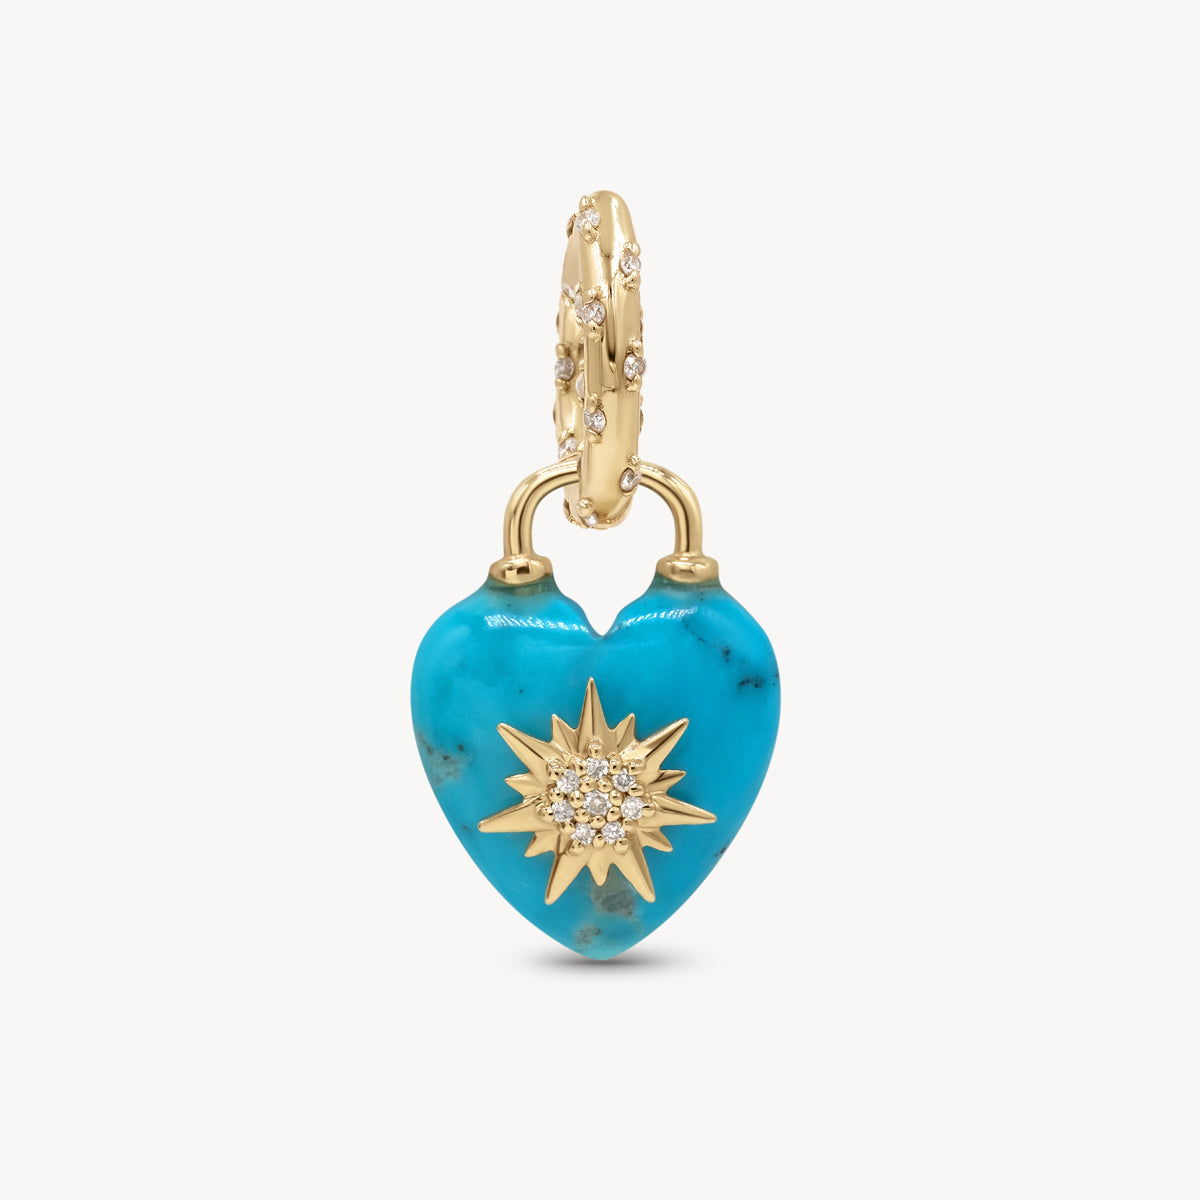 Trust Your Heart Carved Turquoise Charm